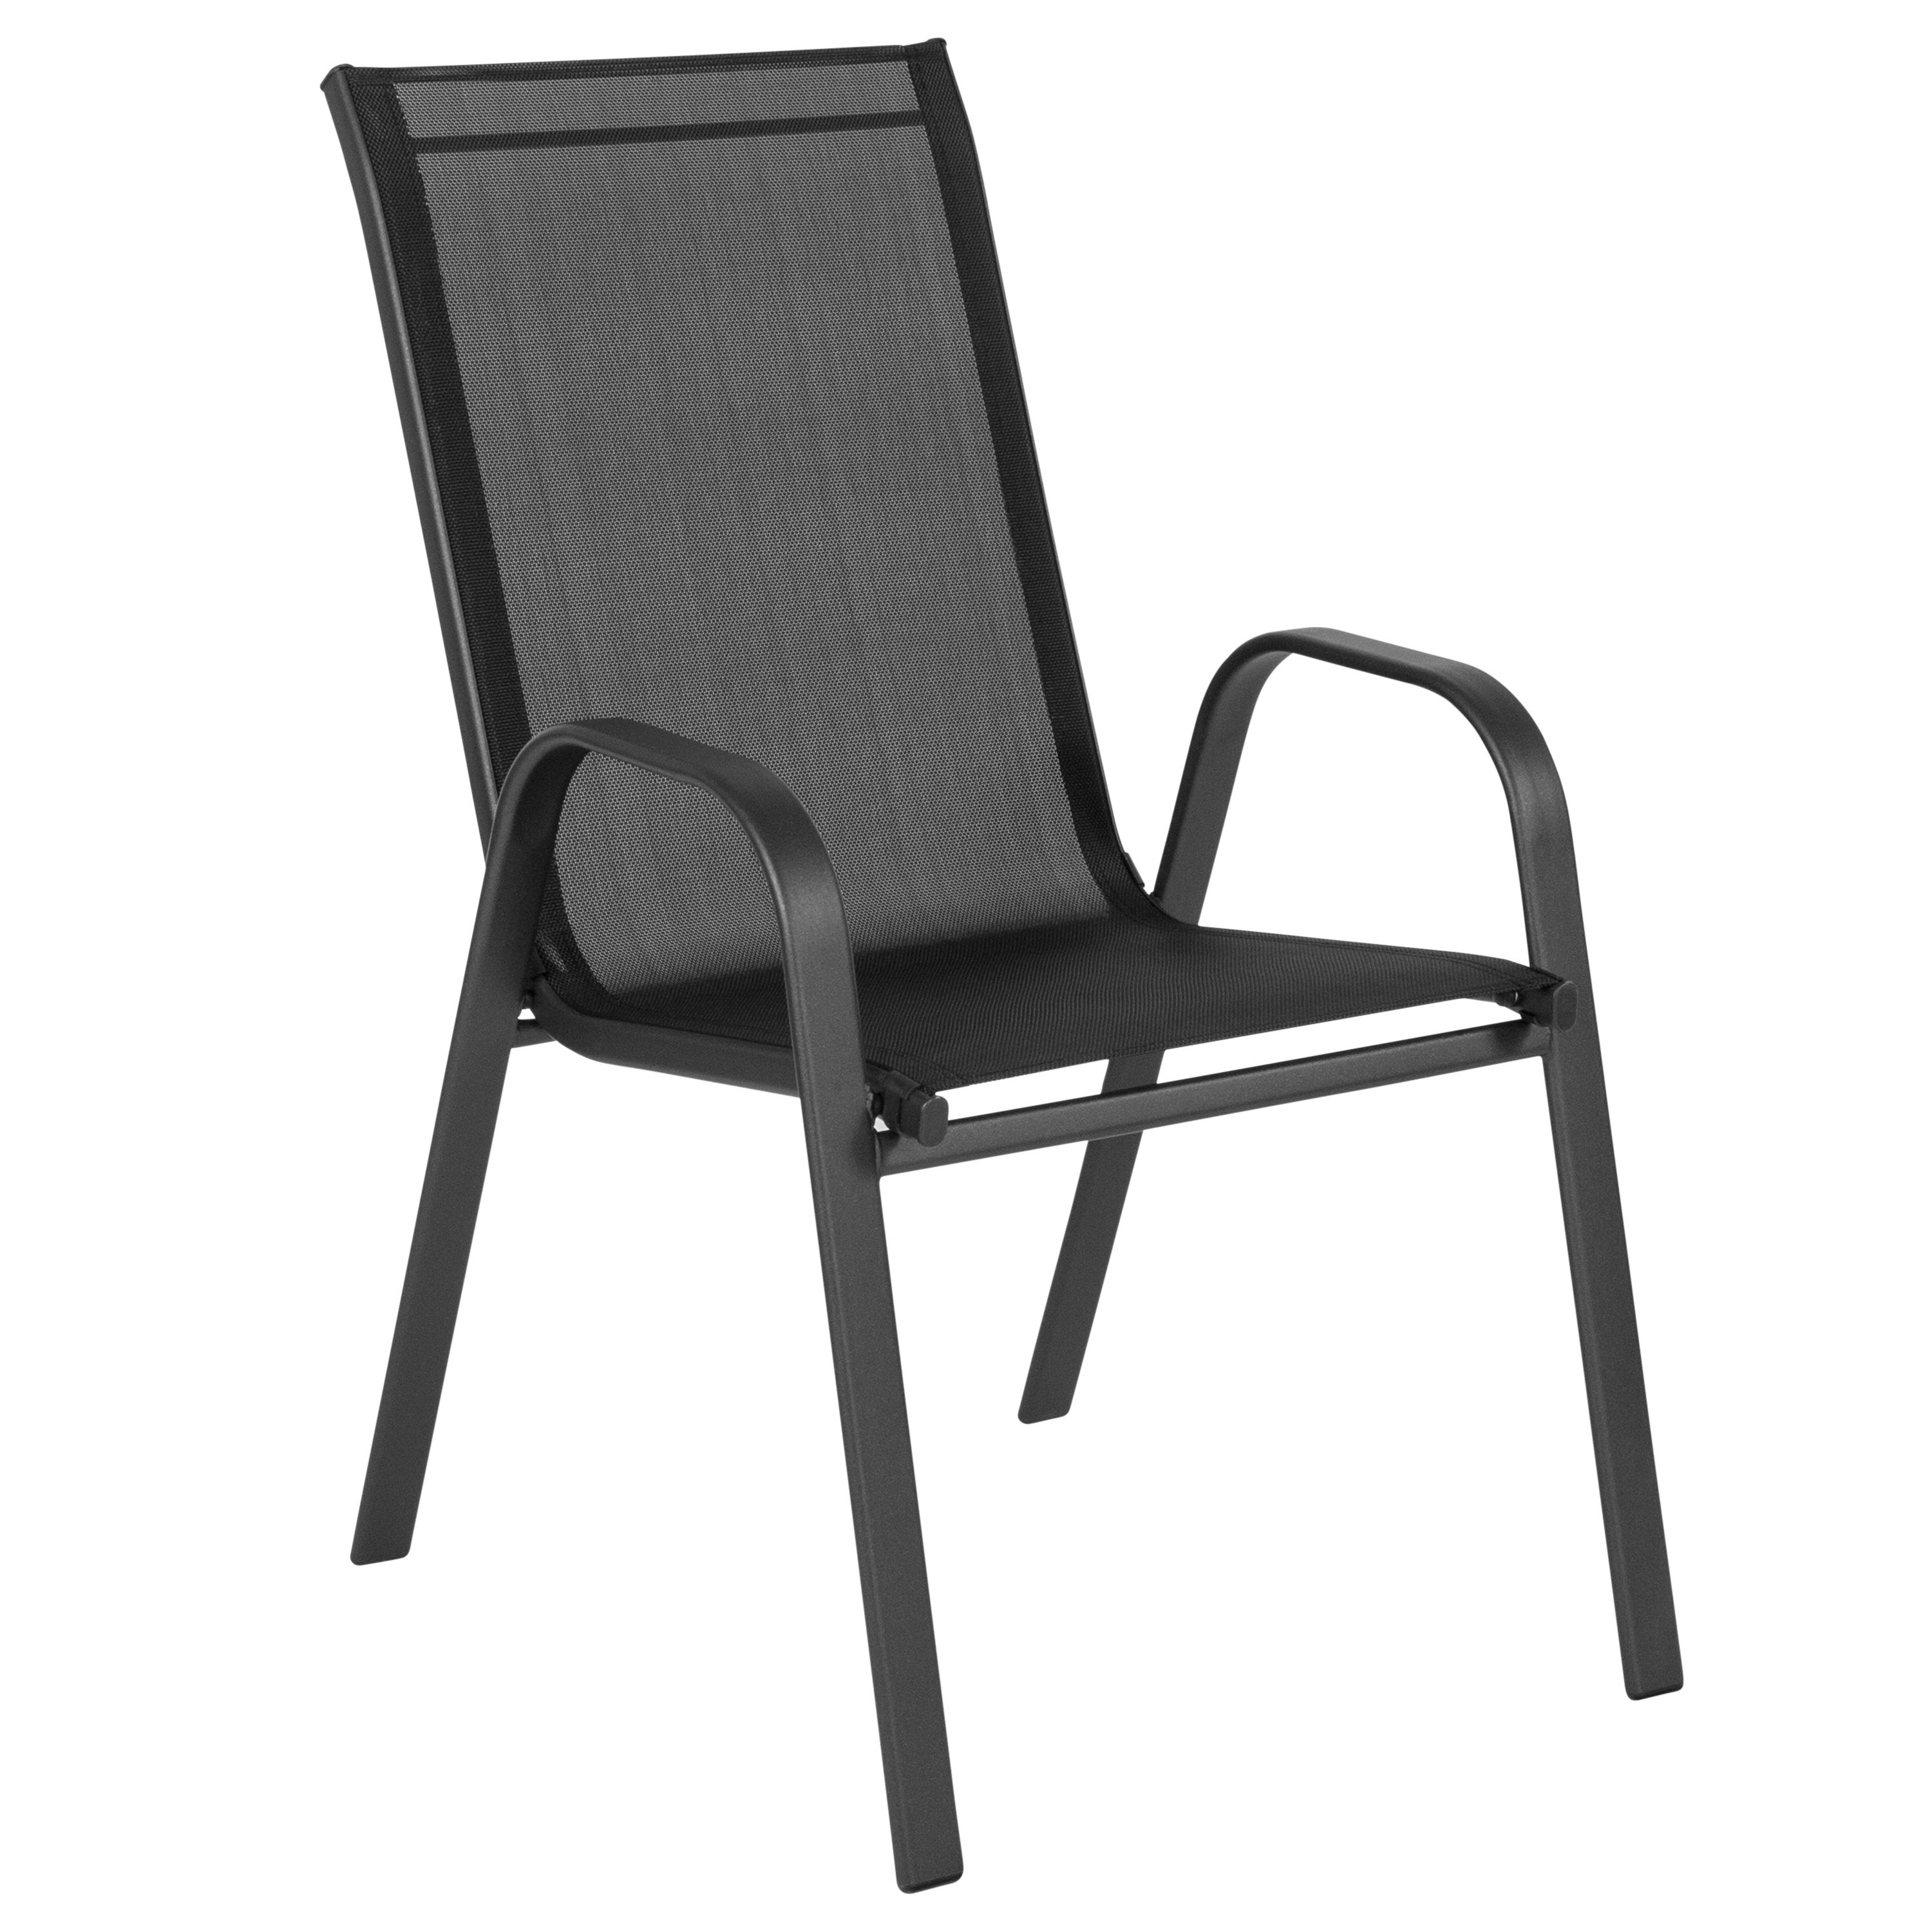 Sling Patio Chairs Stackable Target • Fence Ideas Site